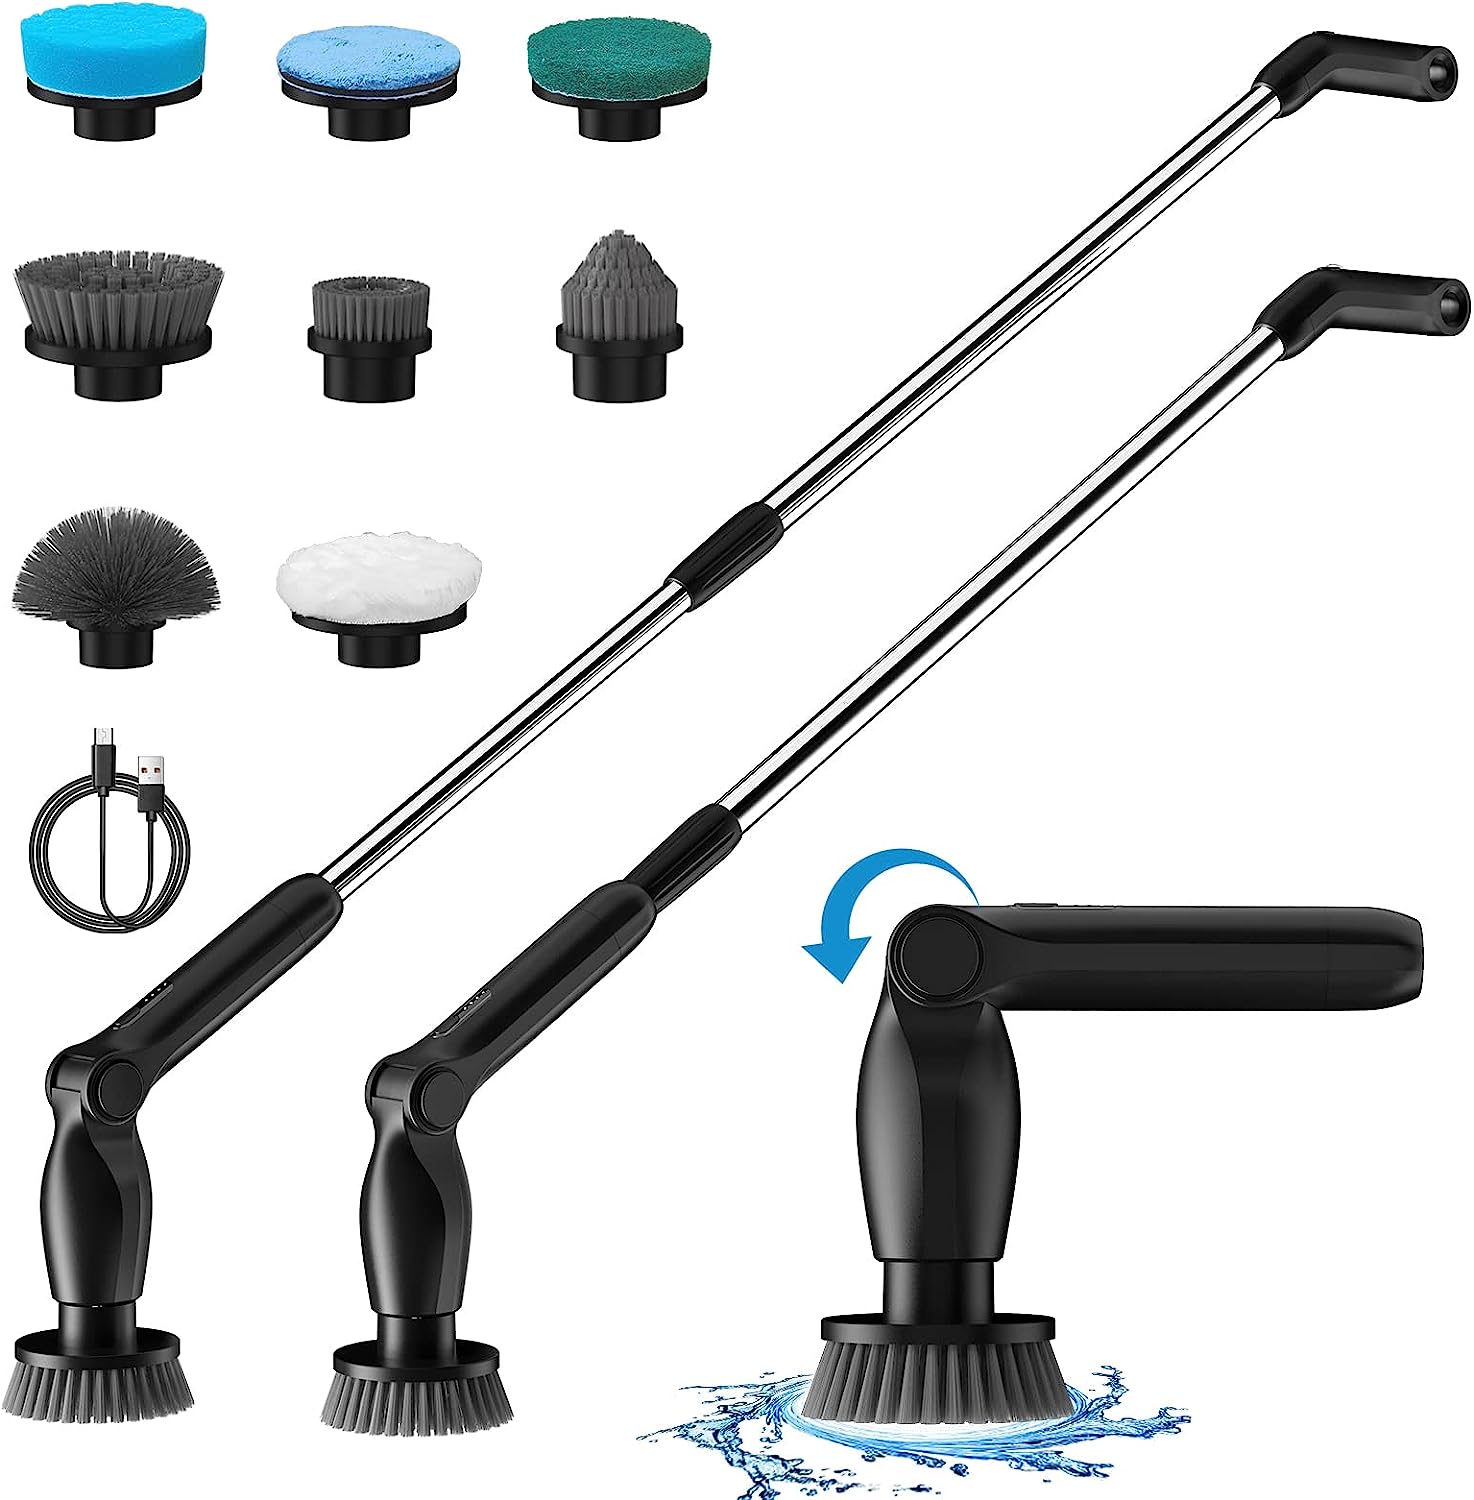 Swtroom Electric Spin Scrubber, Cordless Power Brush Floor Scrubber with Adjustable Extension Arm and 4 Replaceable Bathroom Cleaning BR